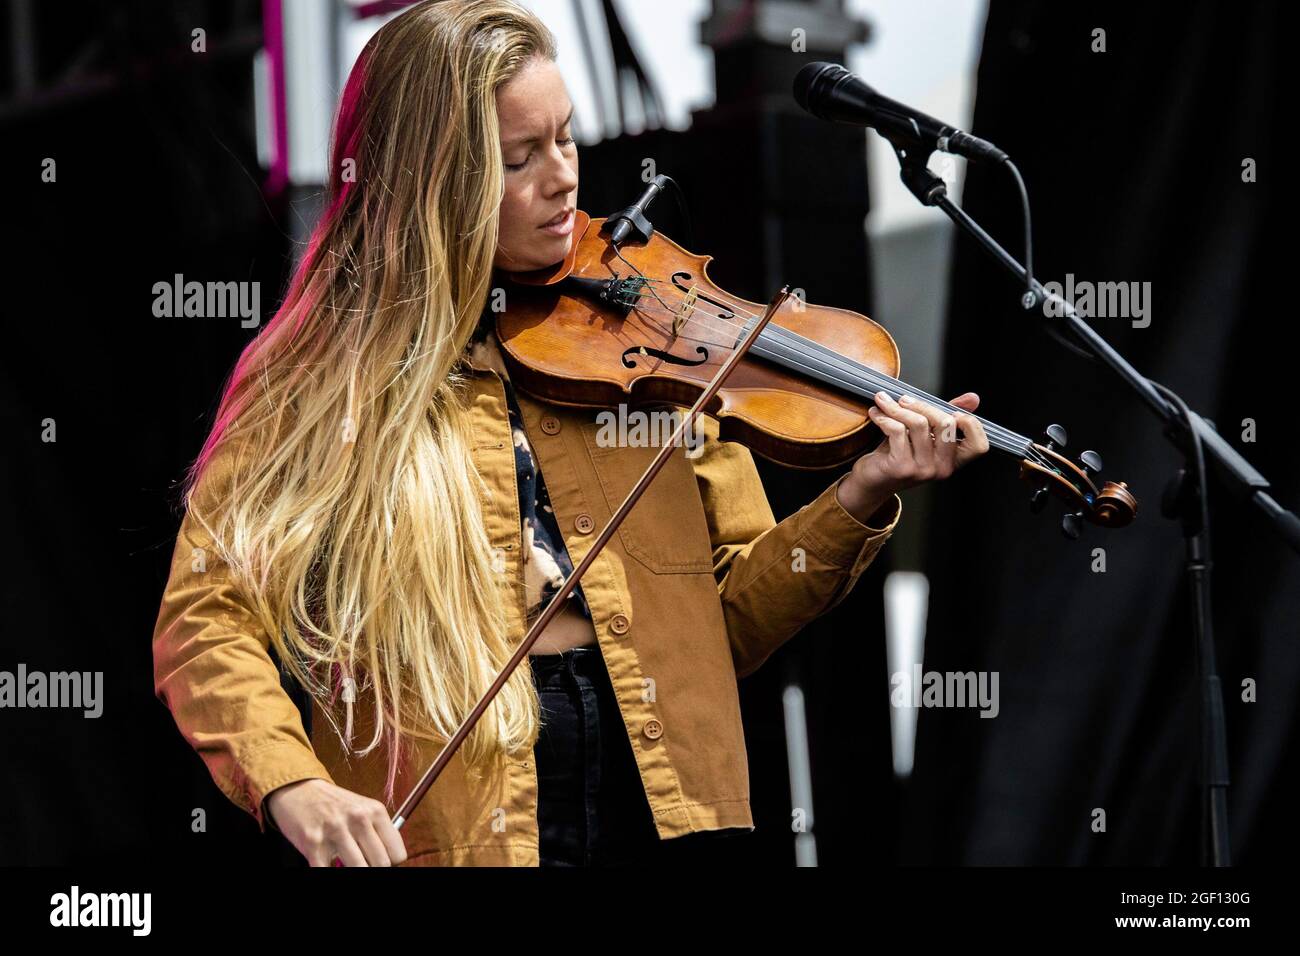 Edmonton, 21st Aug, 2021. Canadian Musician Linsey Beckett performs live during Again Outdoor Festival at Northlands Exhibition Grounds in Edmonton. Credit: SOPA Images Limited/Alamy Live News Photo -